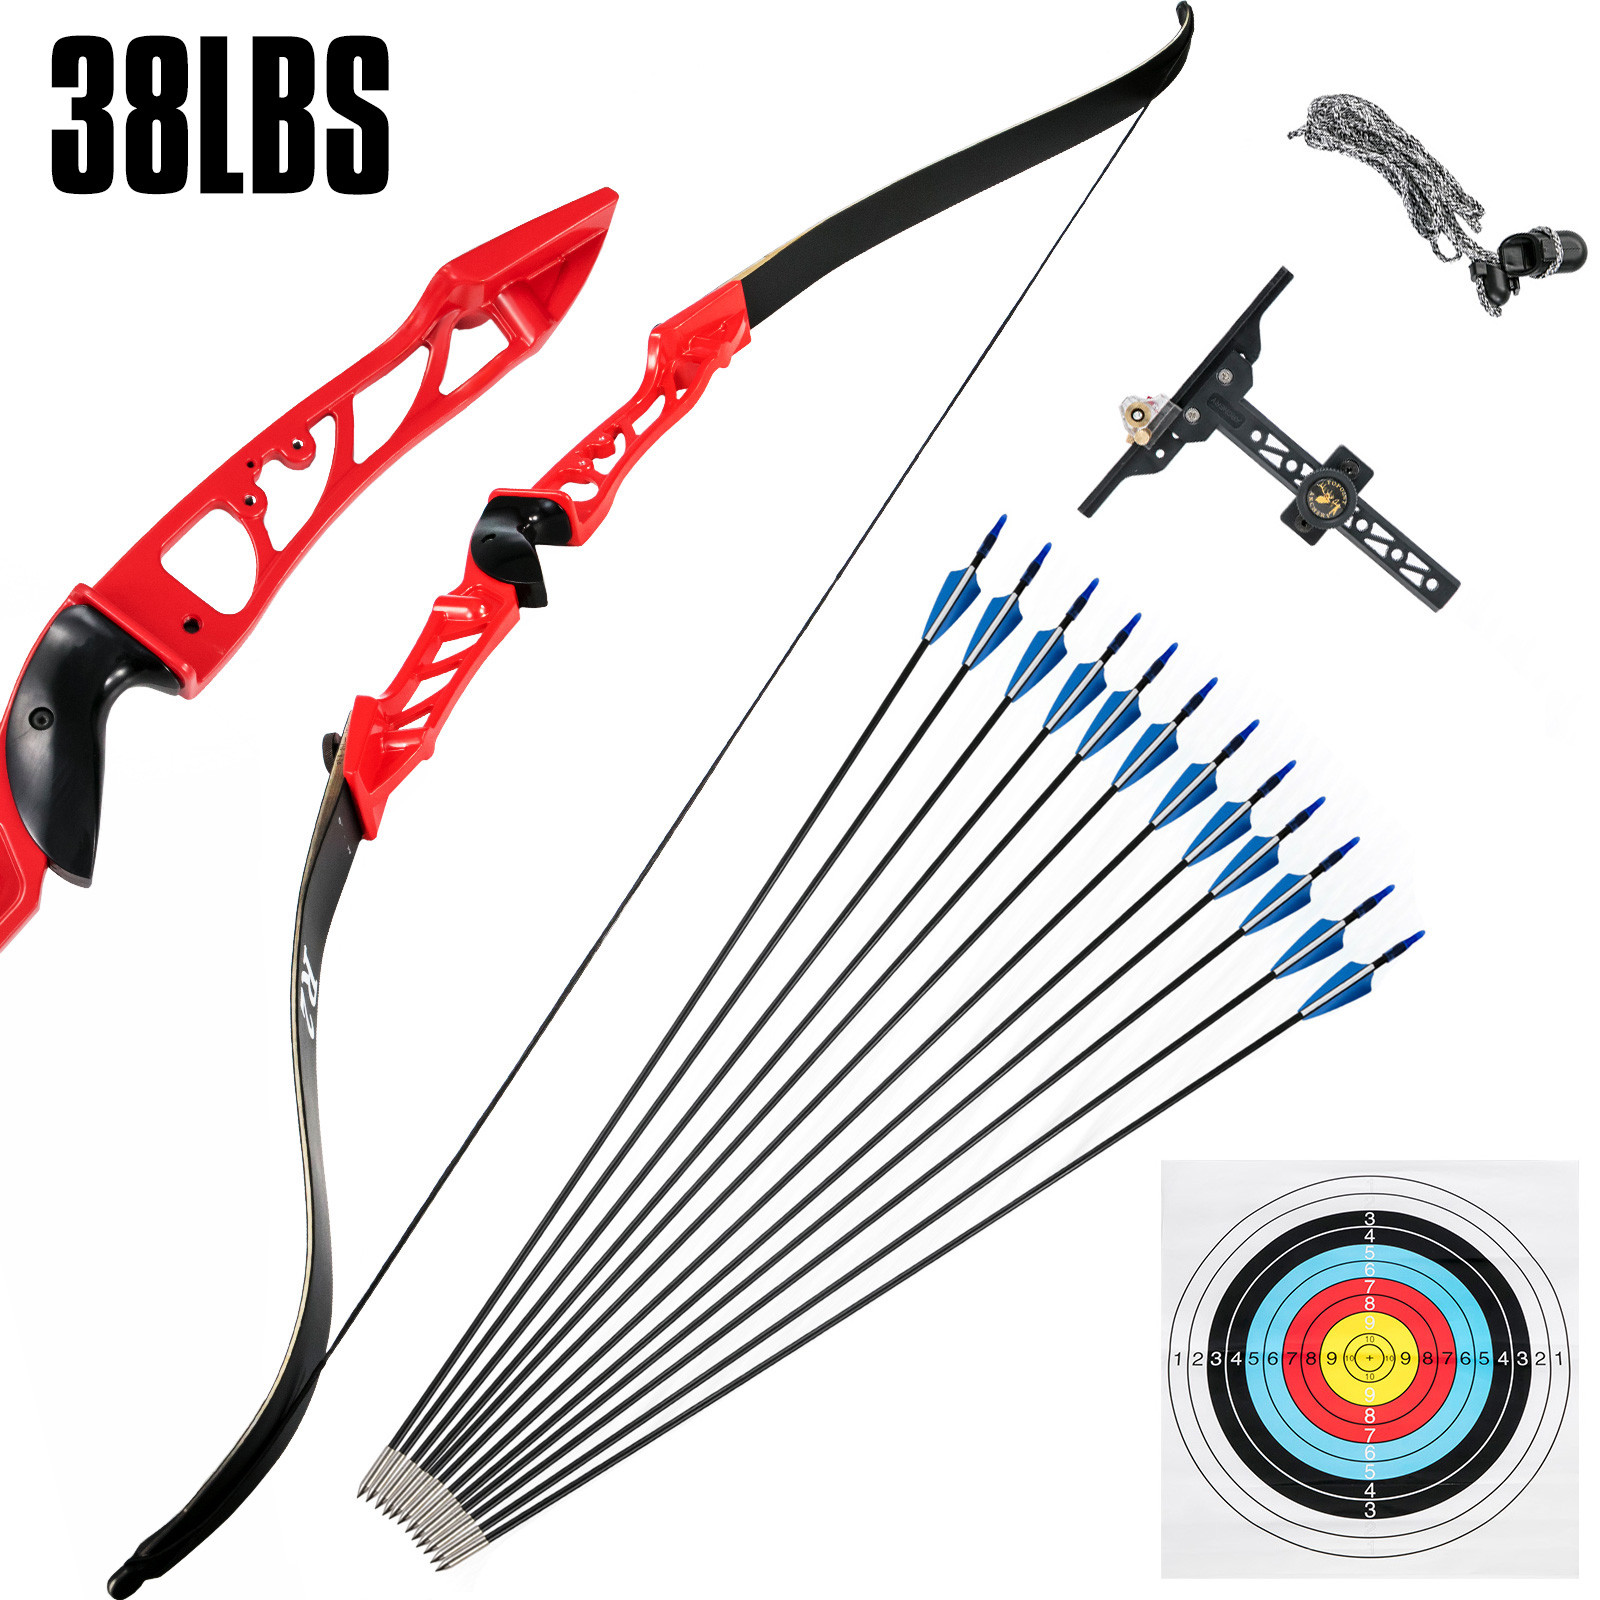 Takedown Recurve Bow Set 38LBS Archery Bow Arrow Adults Youth Shooting Practice от Vevor Many GEOs